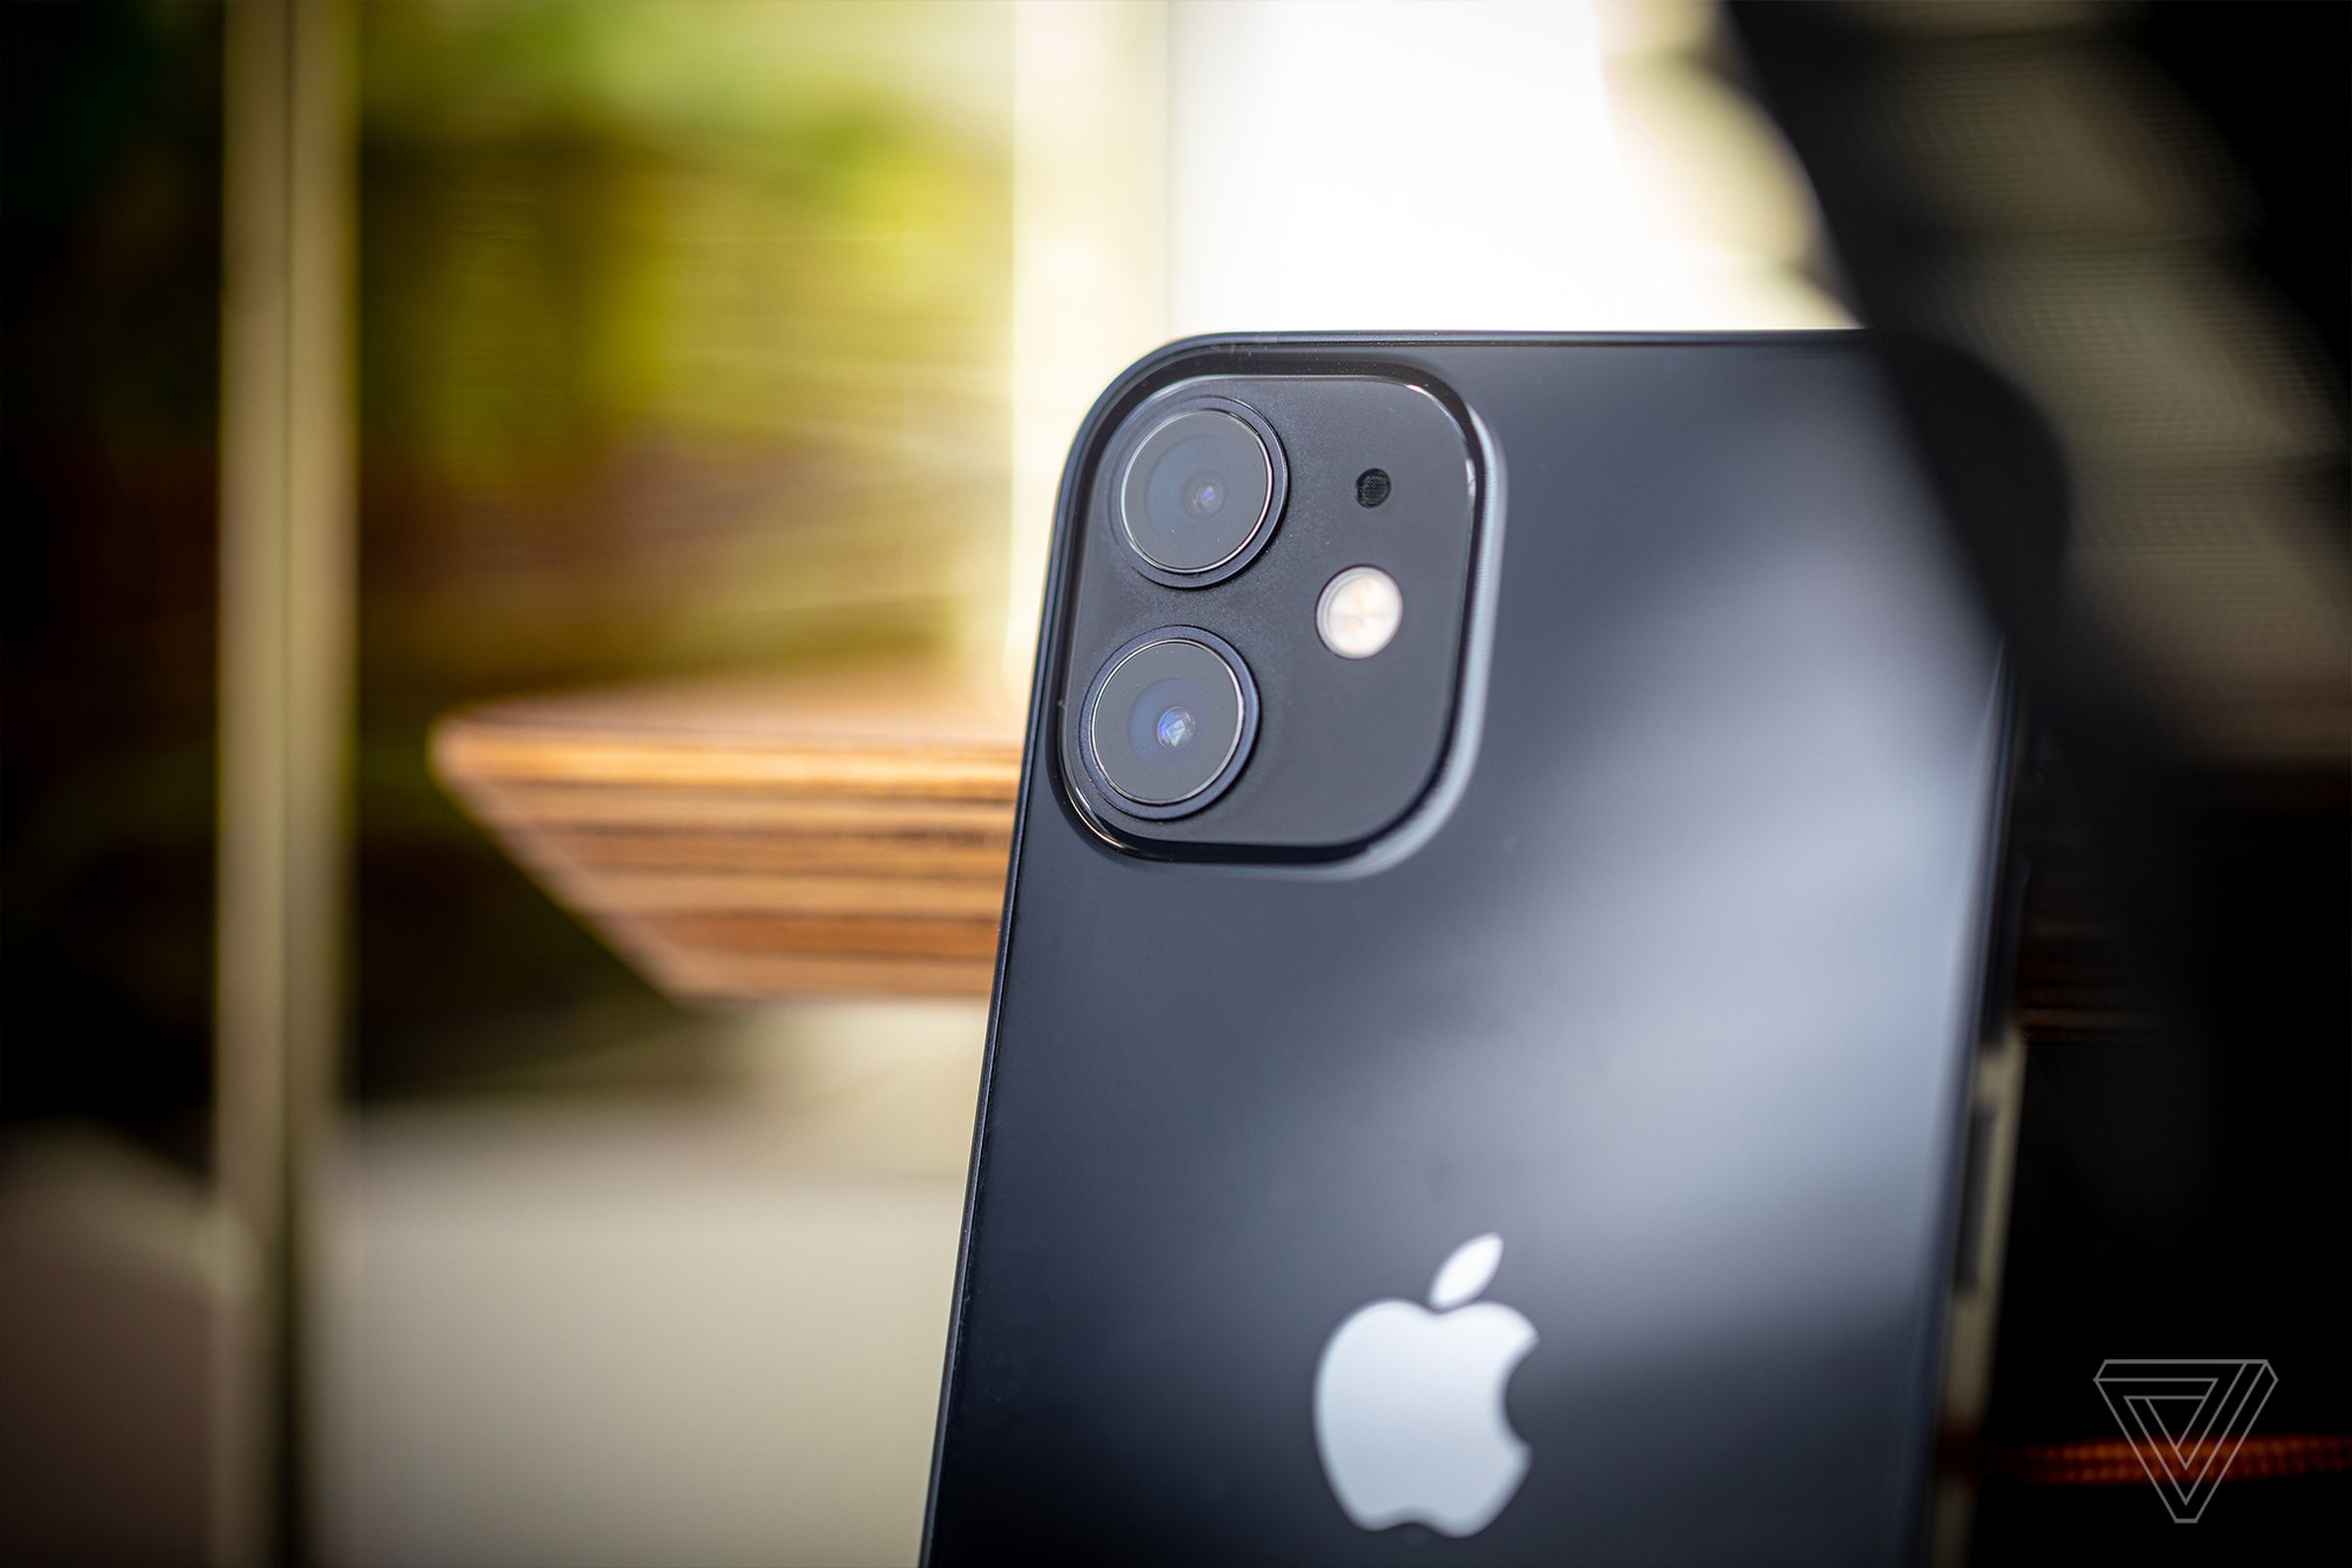 The iPhone 12 mini has a regular wide and an ultrawide camera